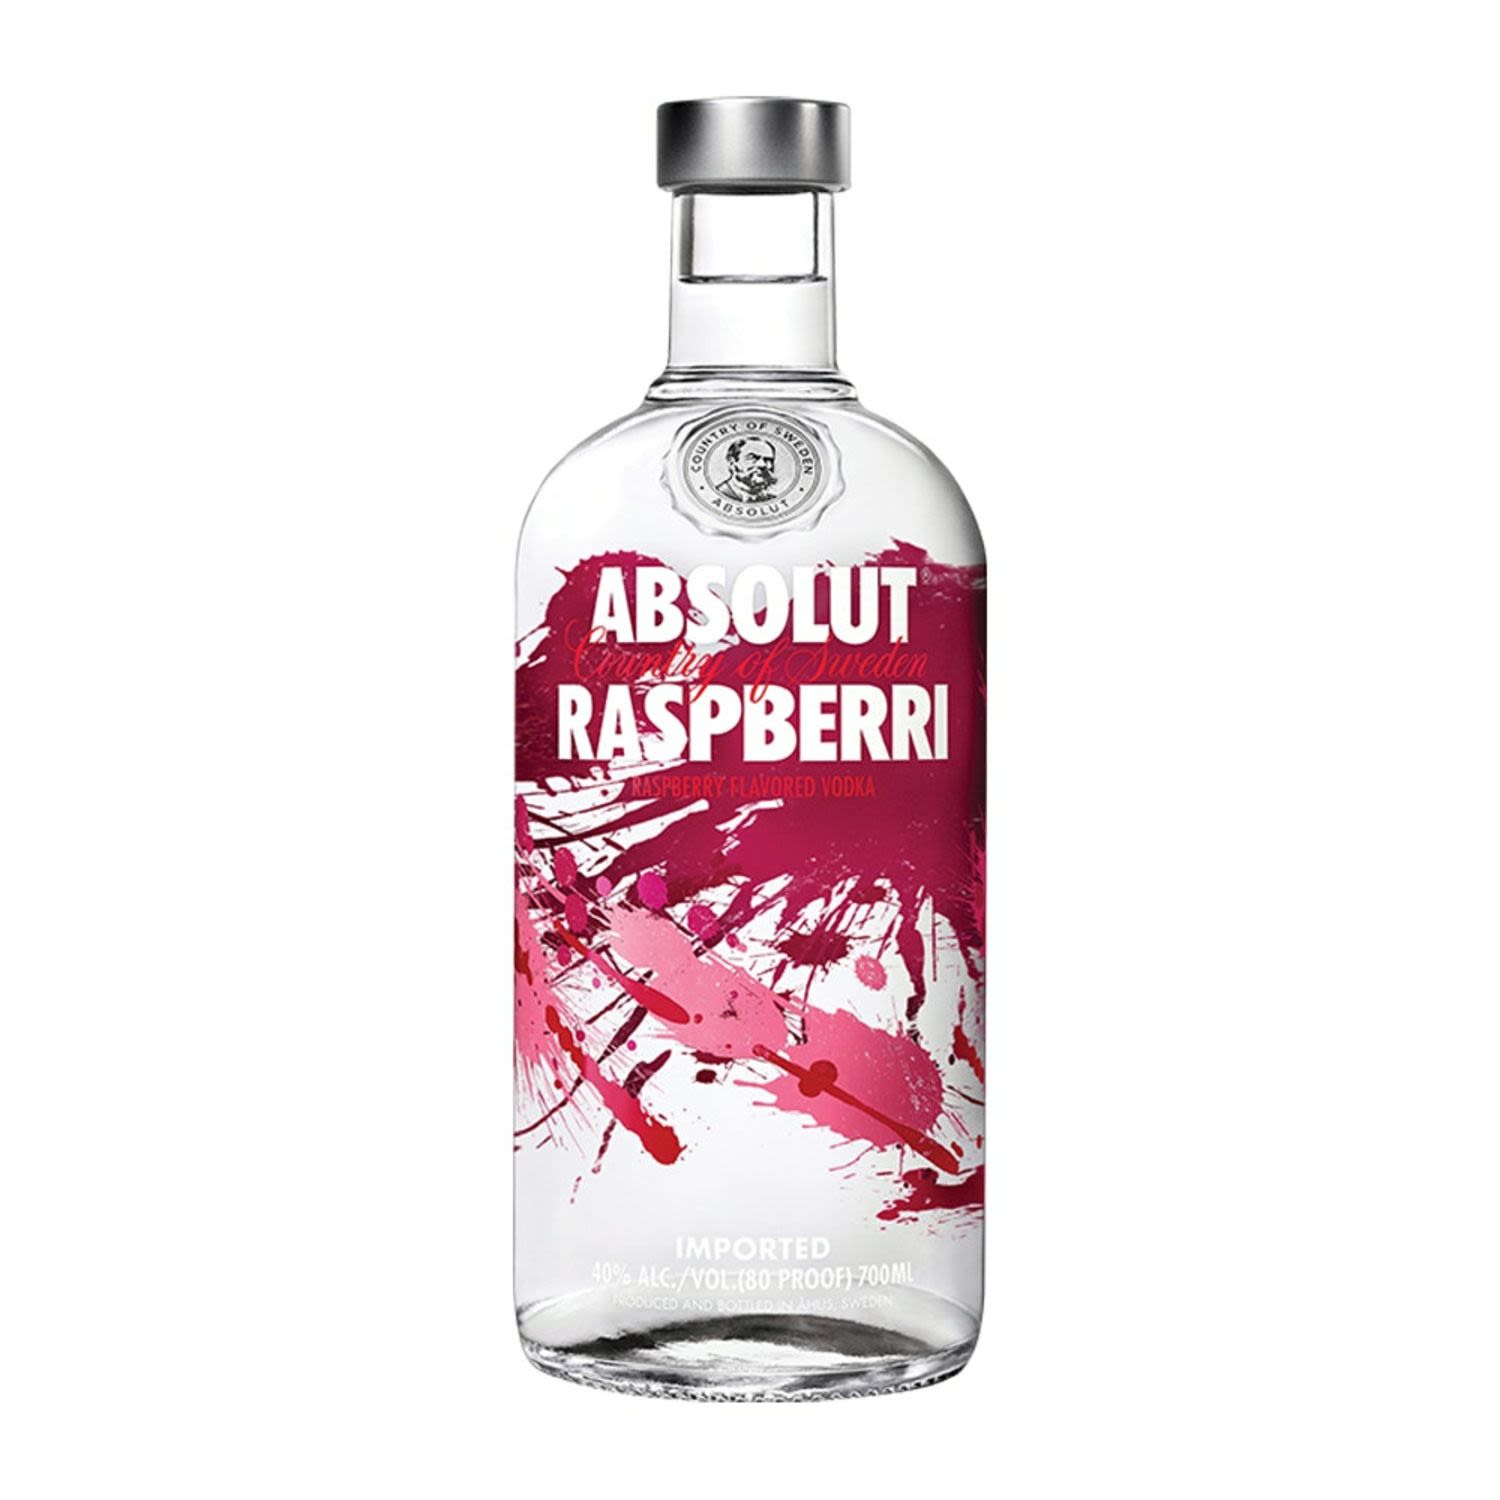 Absolut Raspberri is a fun, flavoured Vodka from this iconic Swedish producer. Drink it straight or mixed with lemonade for a fun, easy drink!<br /> <br />Alcohol Volume: 40.00%<br /><br />Pack Format: Bottle<br /><br />Standard Drinks: 22</br /><br />Pack Type: Bottle<br /><br />Country of Origin: Sweden<br />